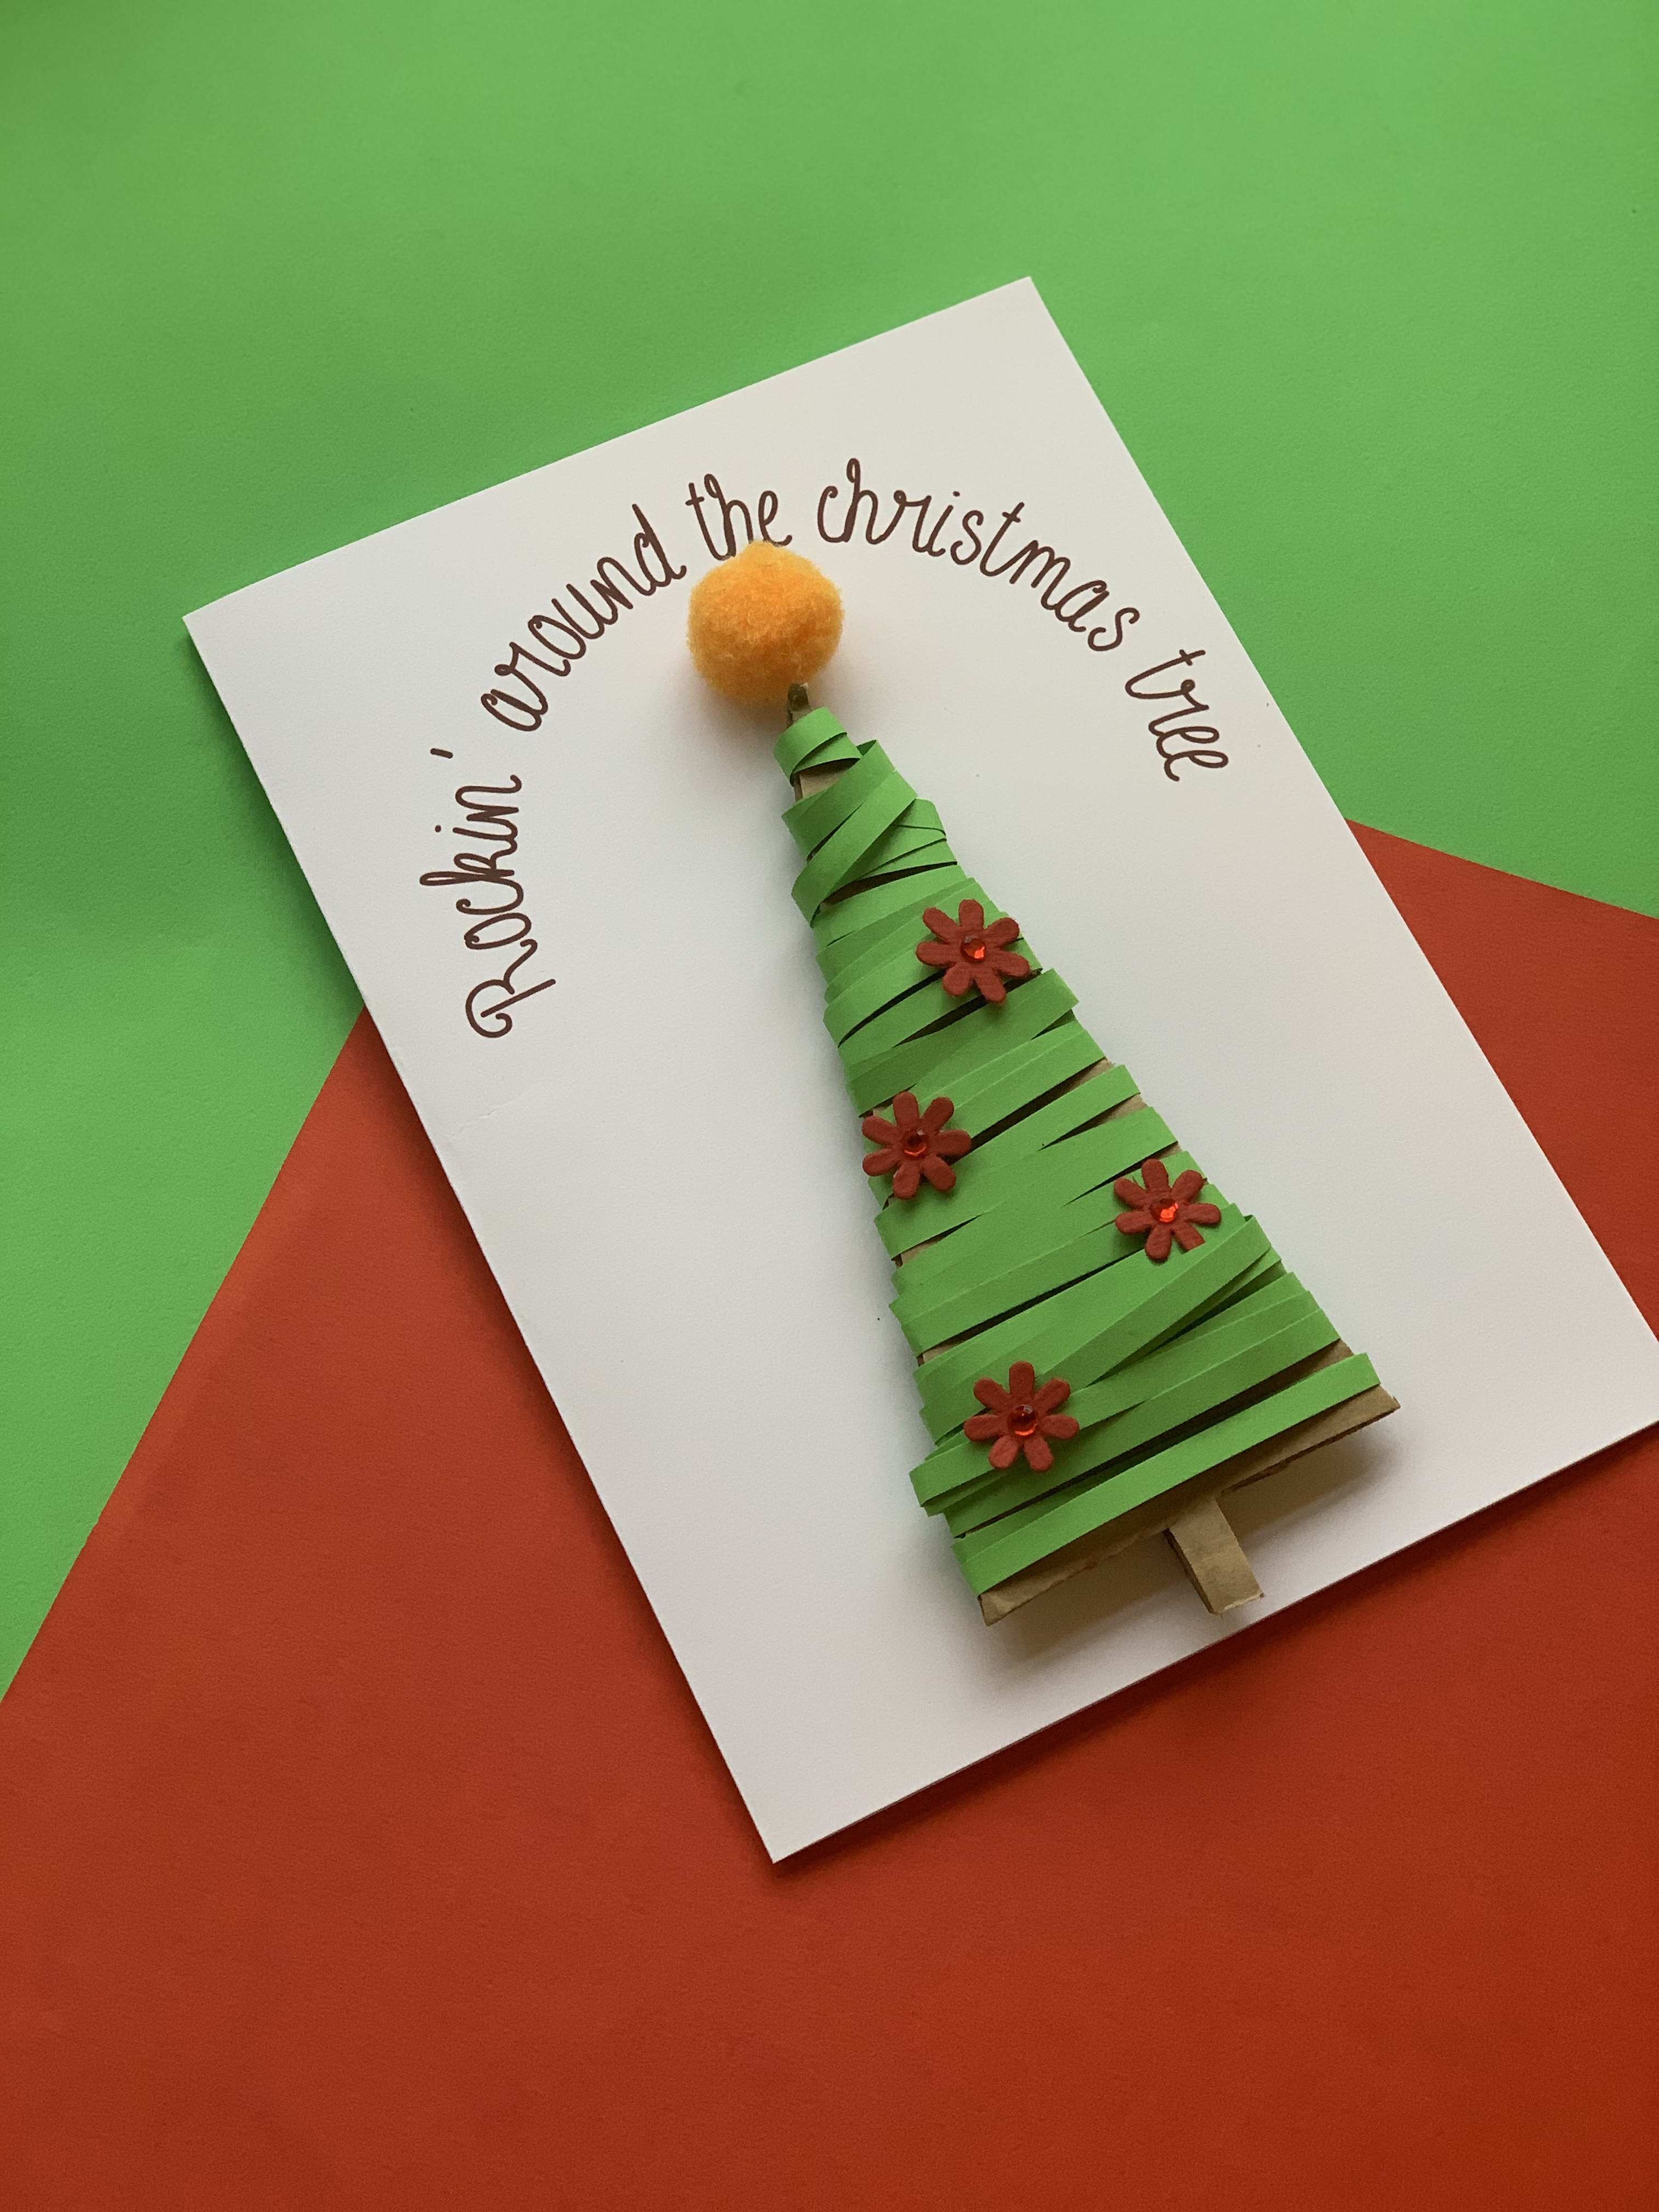 Christmas Card project ideas for toddlers.